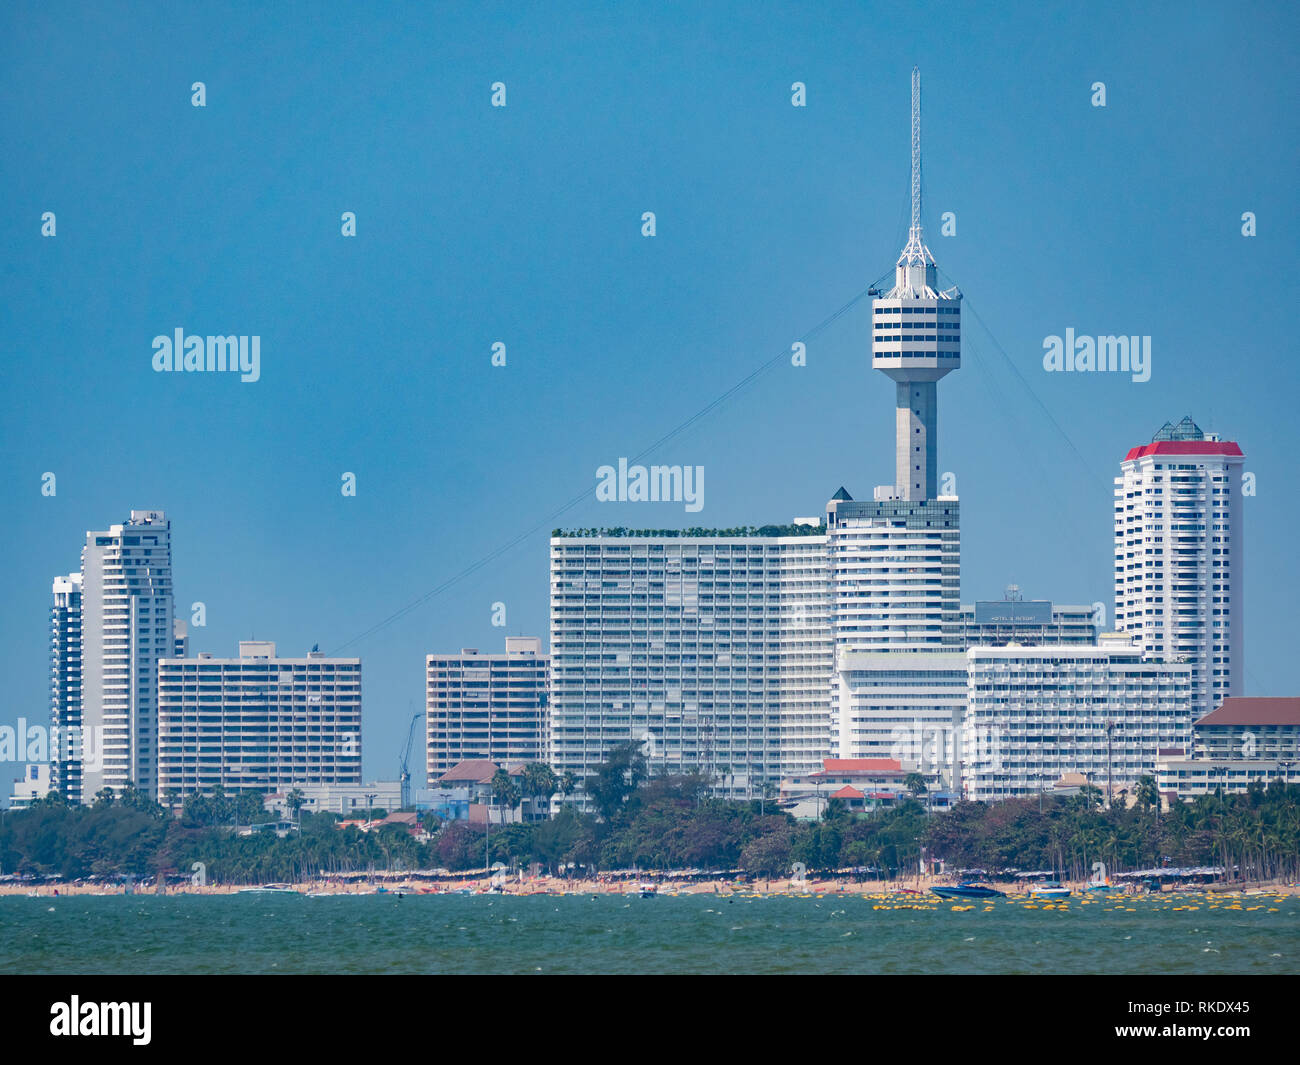 High rice buildings and the tower of Pattaya Park along Jomtien Beach in Pattaya, Thailand Stock Photo